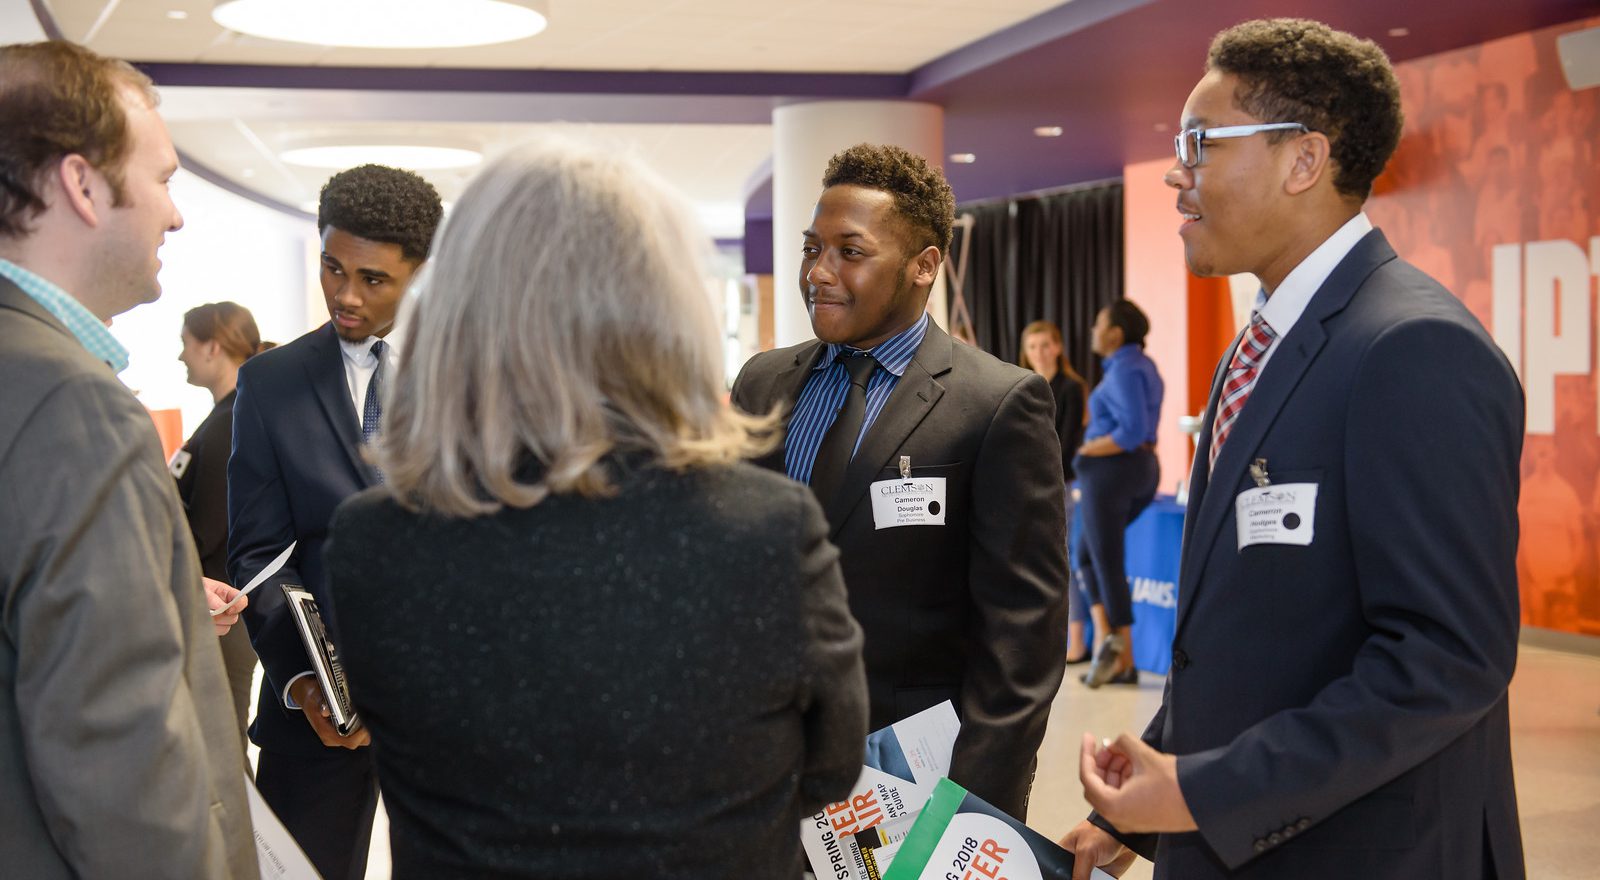 Students at career fair-promotes career connections event